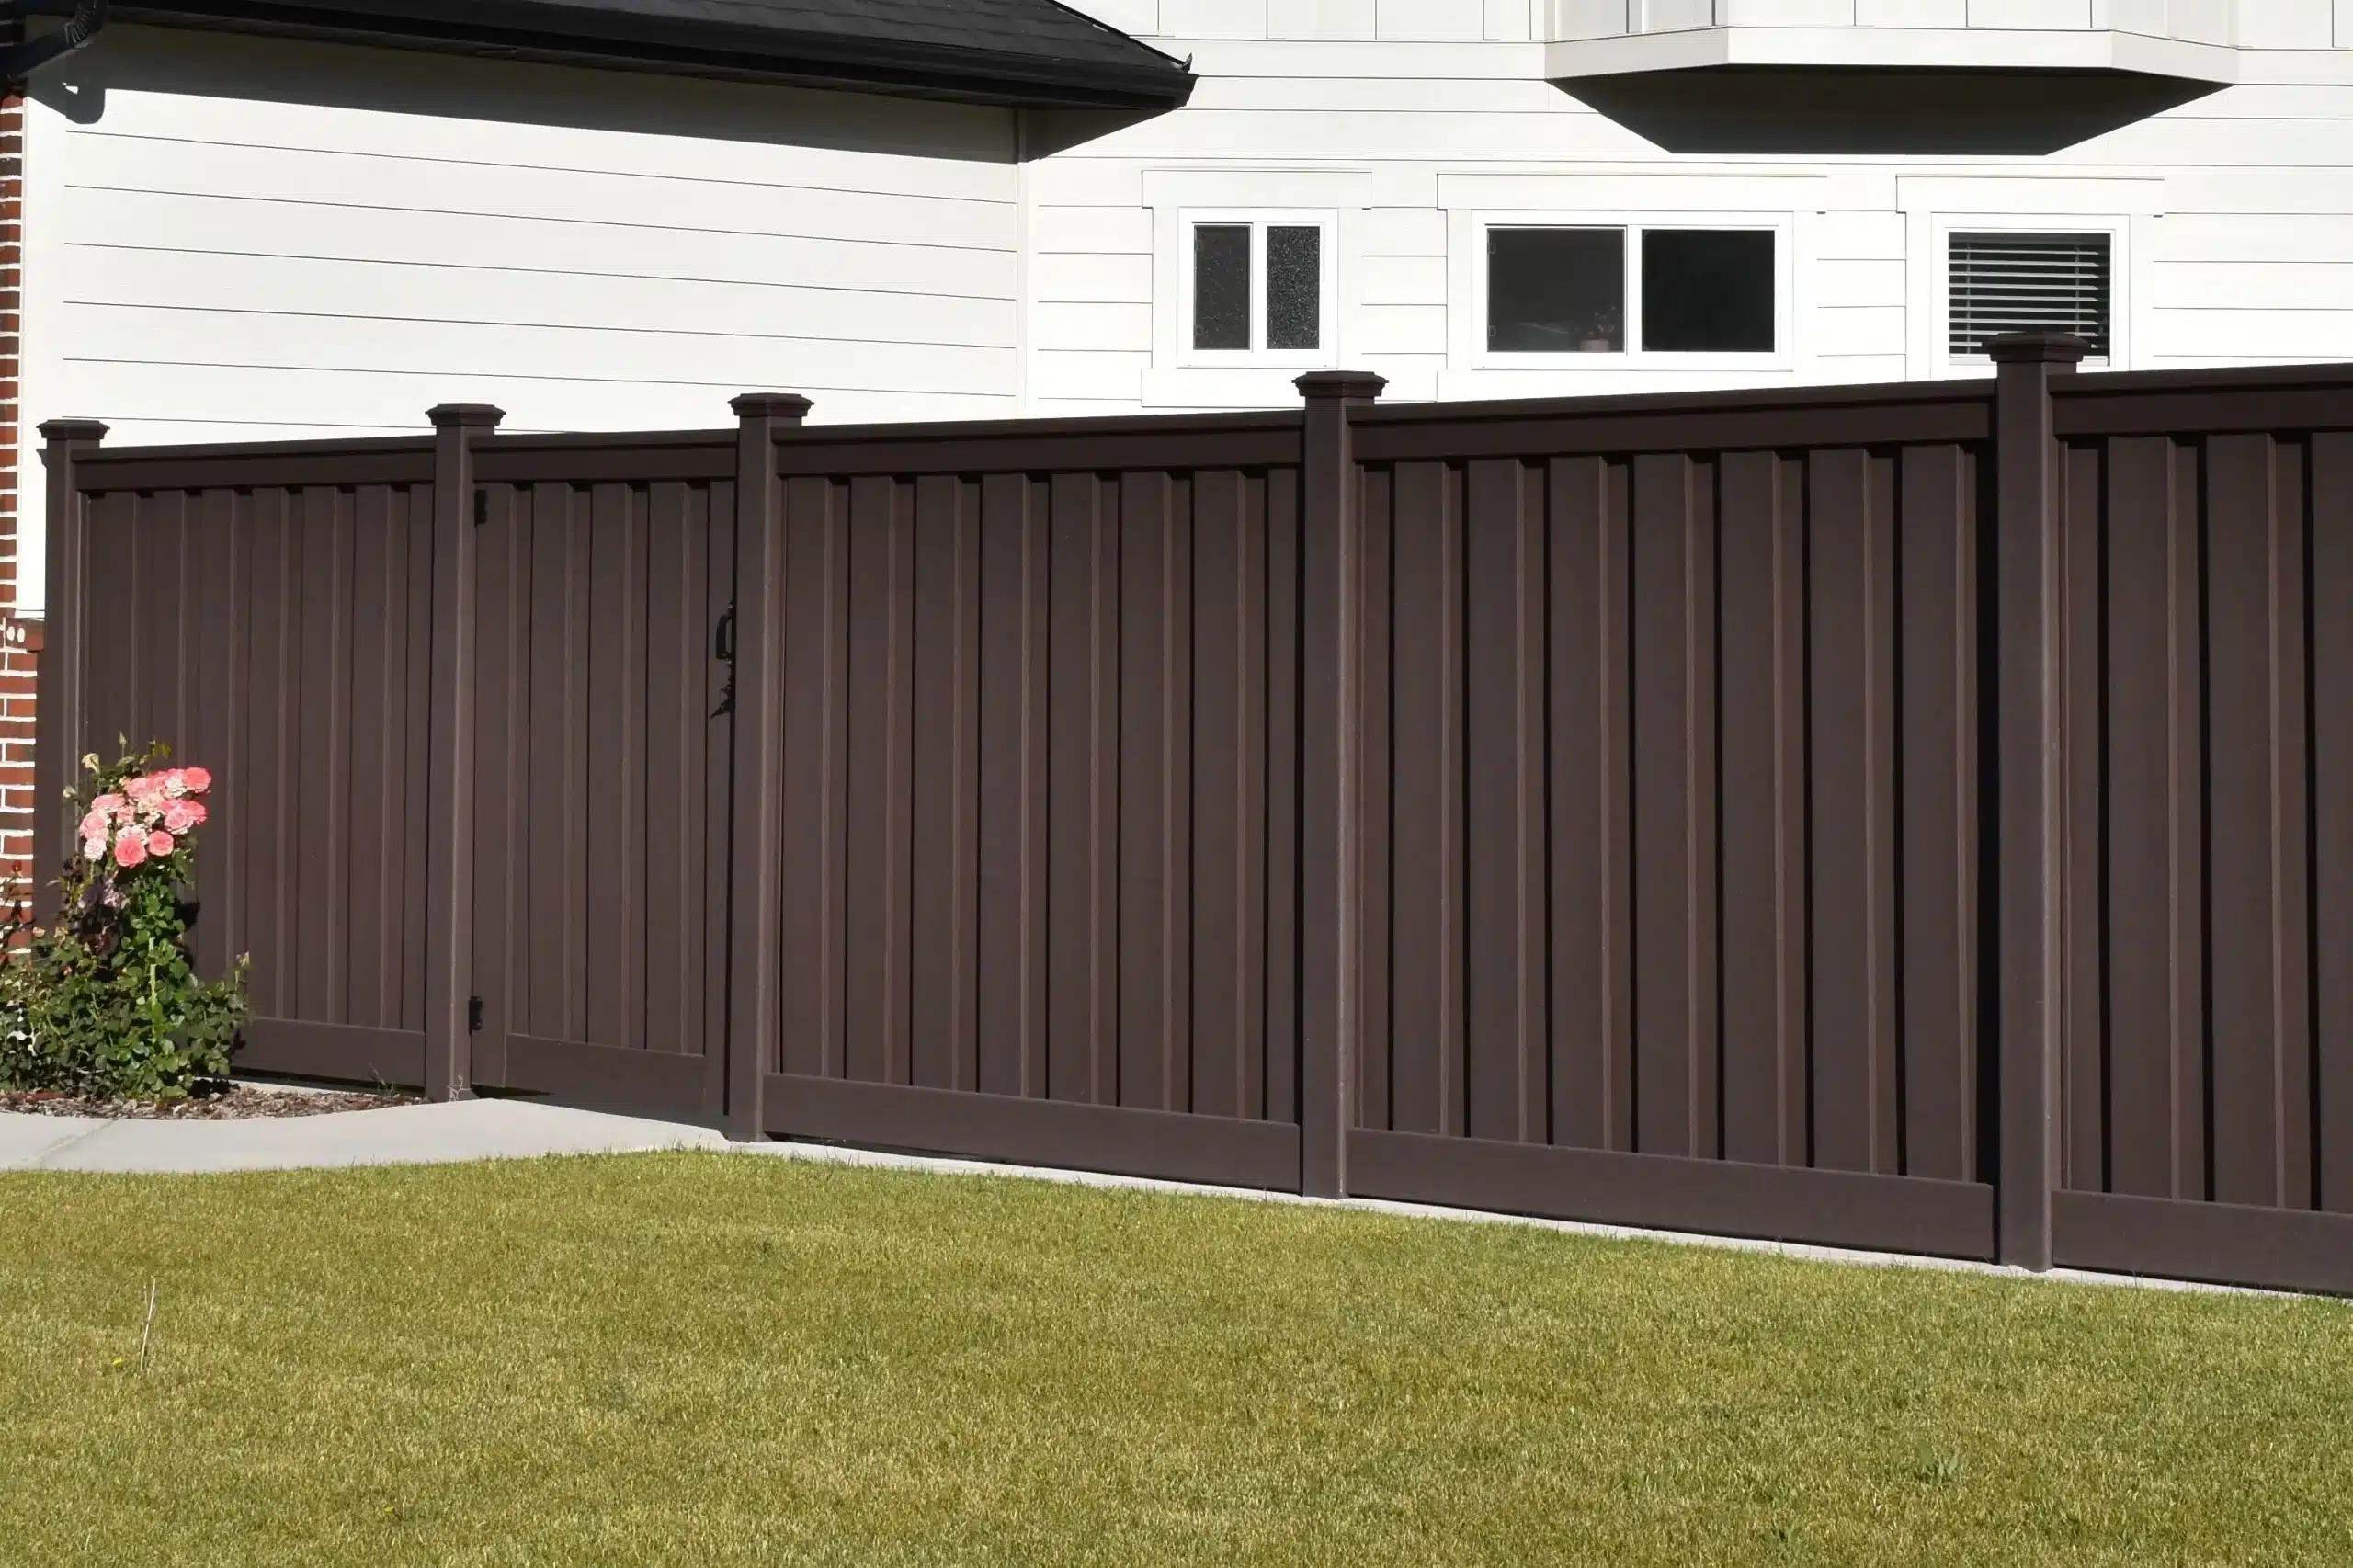 Trex Selcusions fence system in Woodland Brown